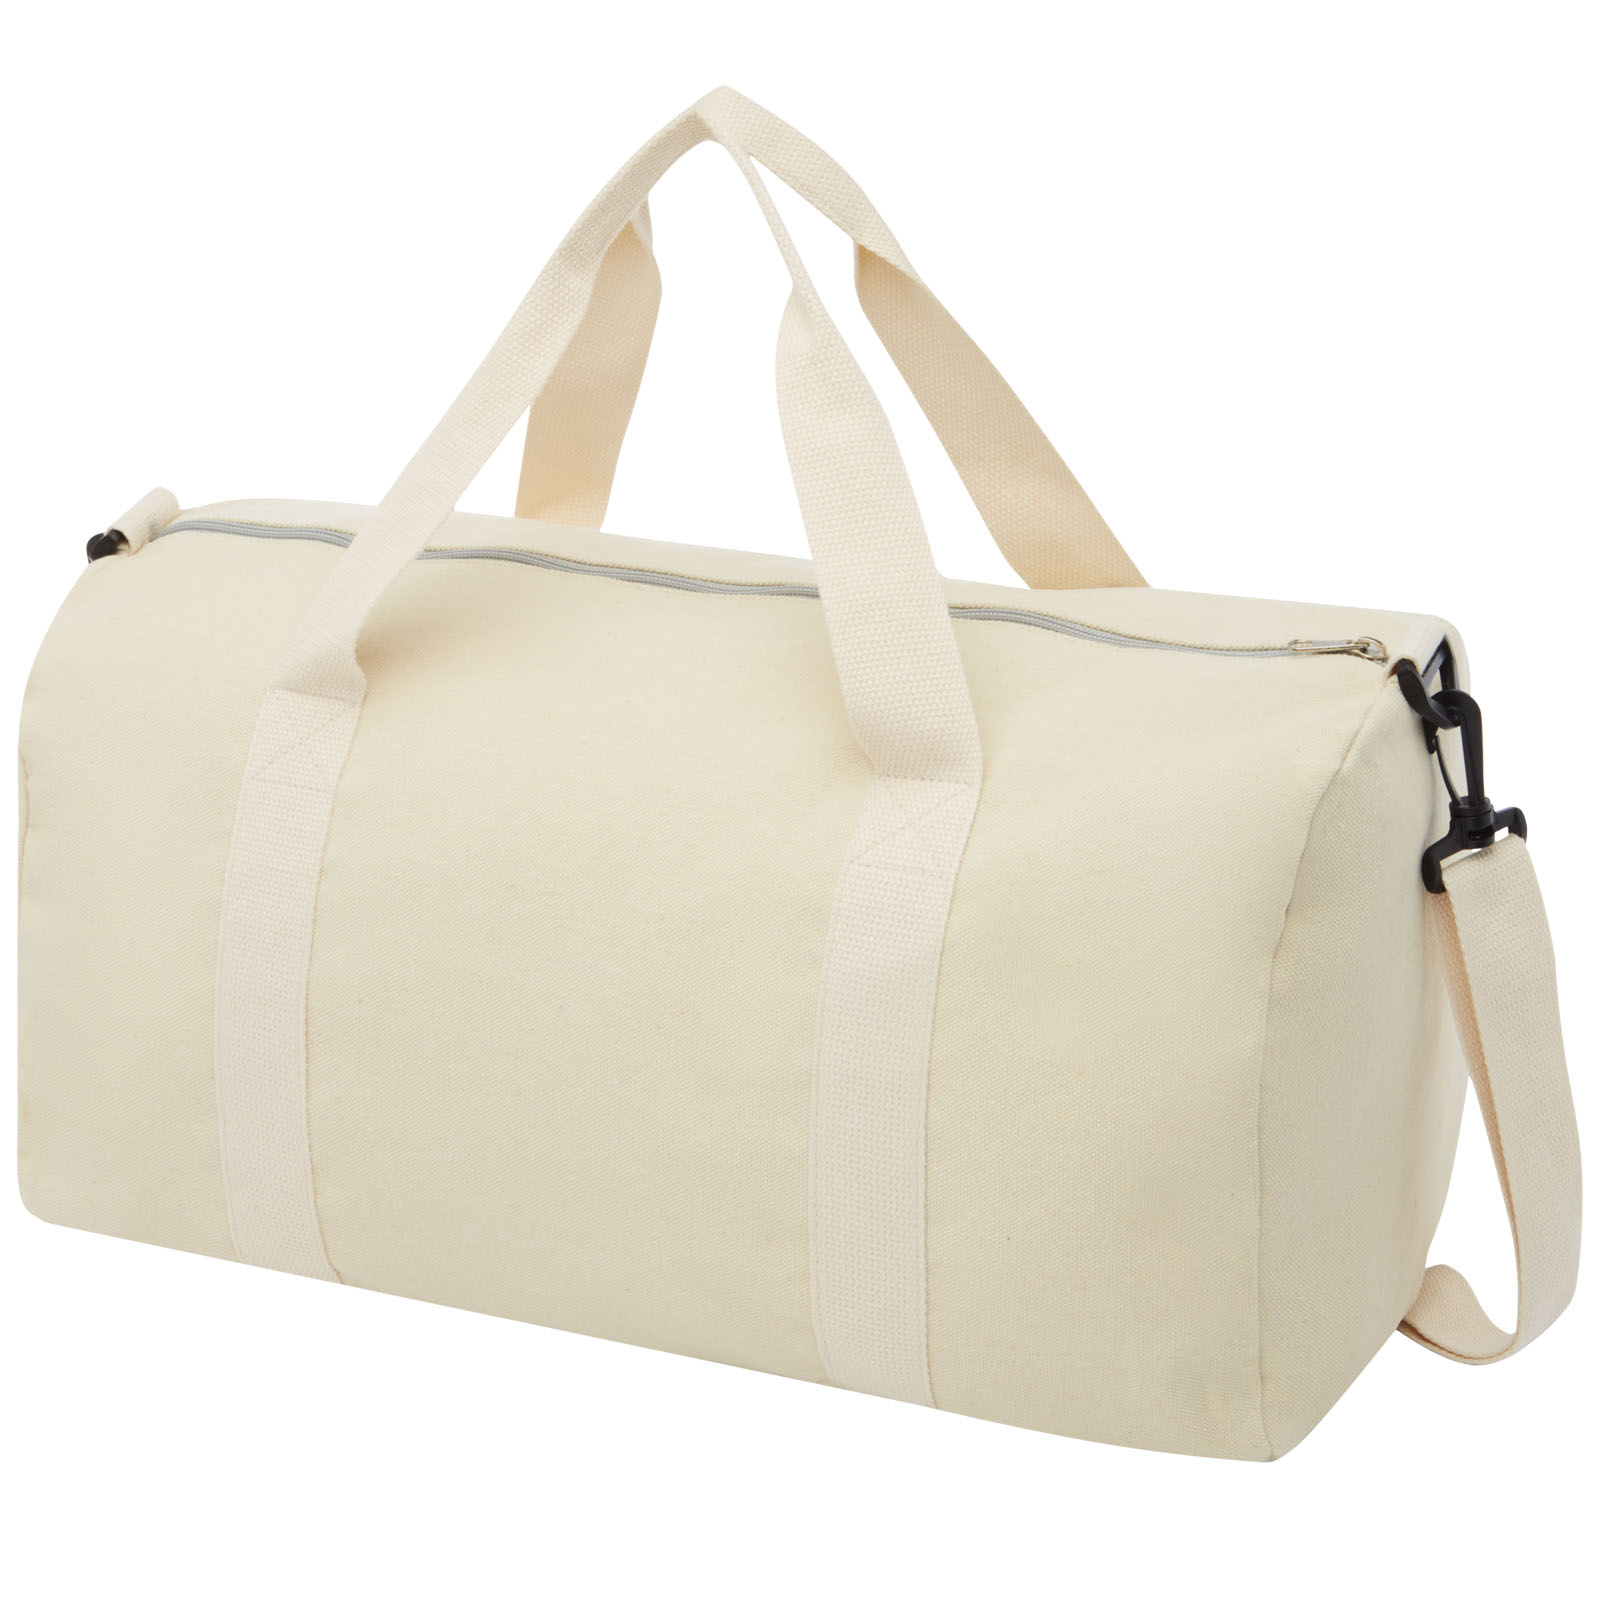 Sailor Bags - Pheebs 450 g/m² recycled cotton and polyester duffel bag 24L